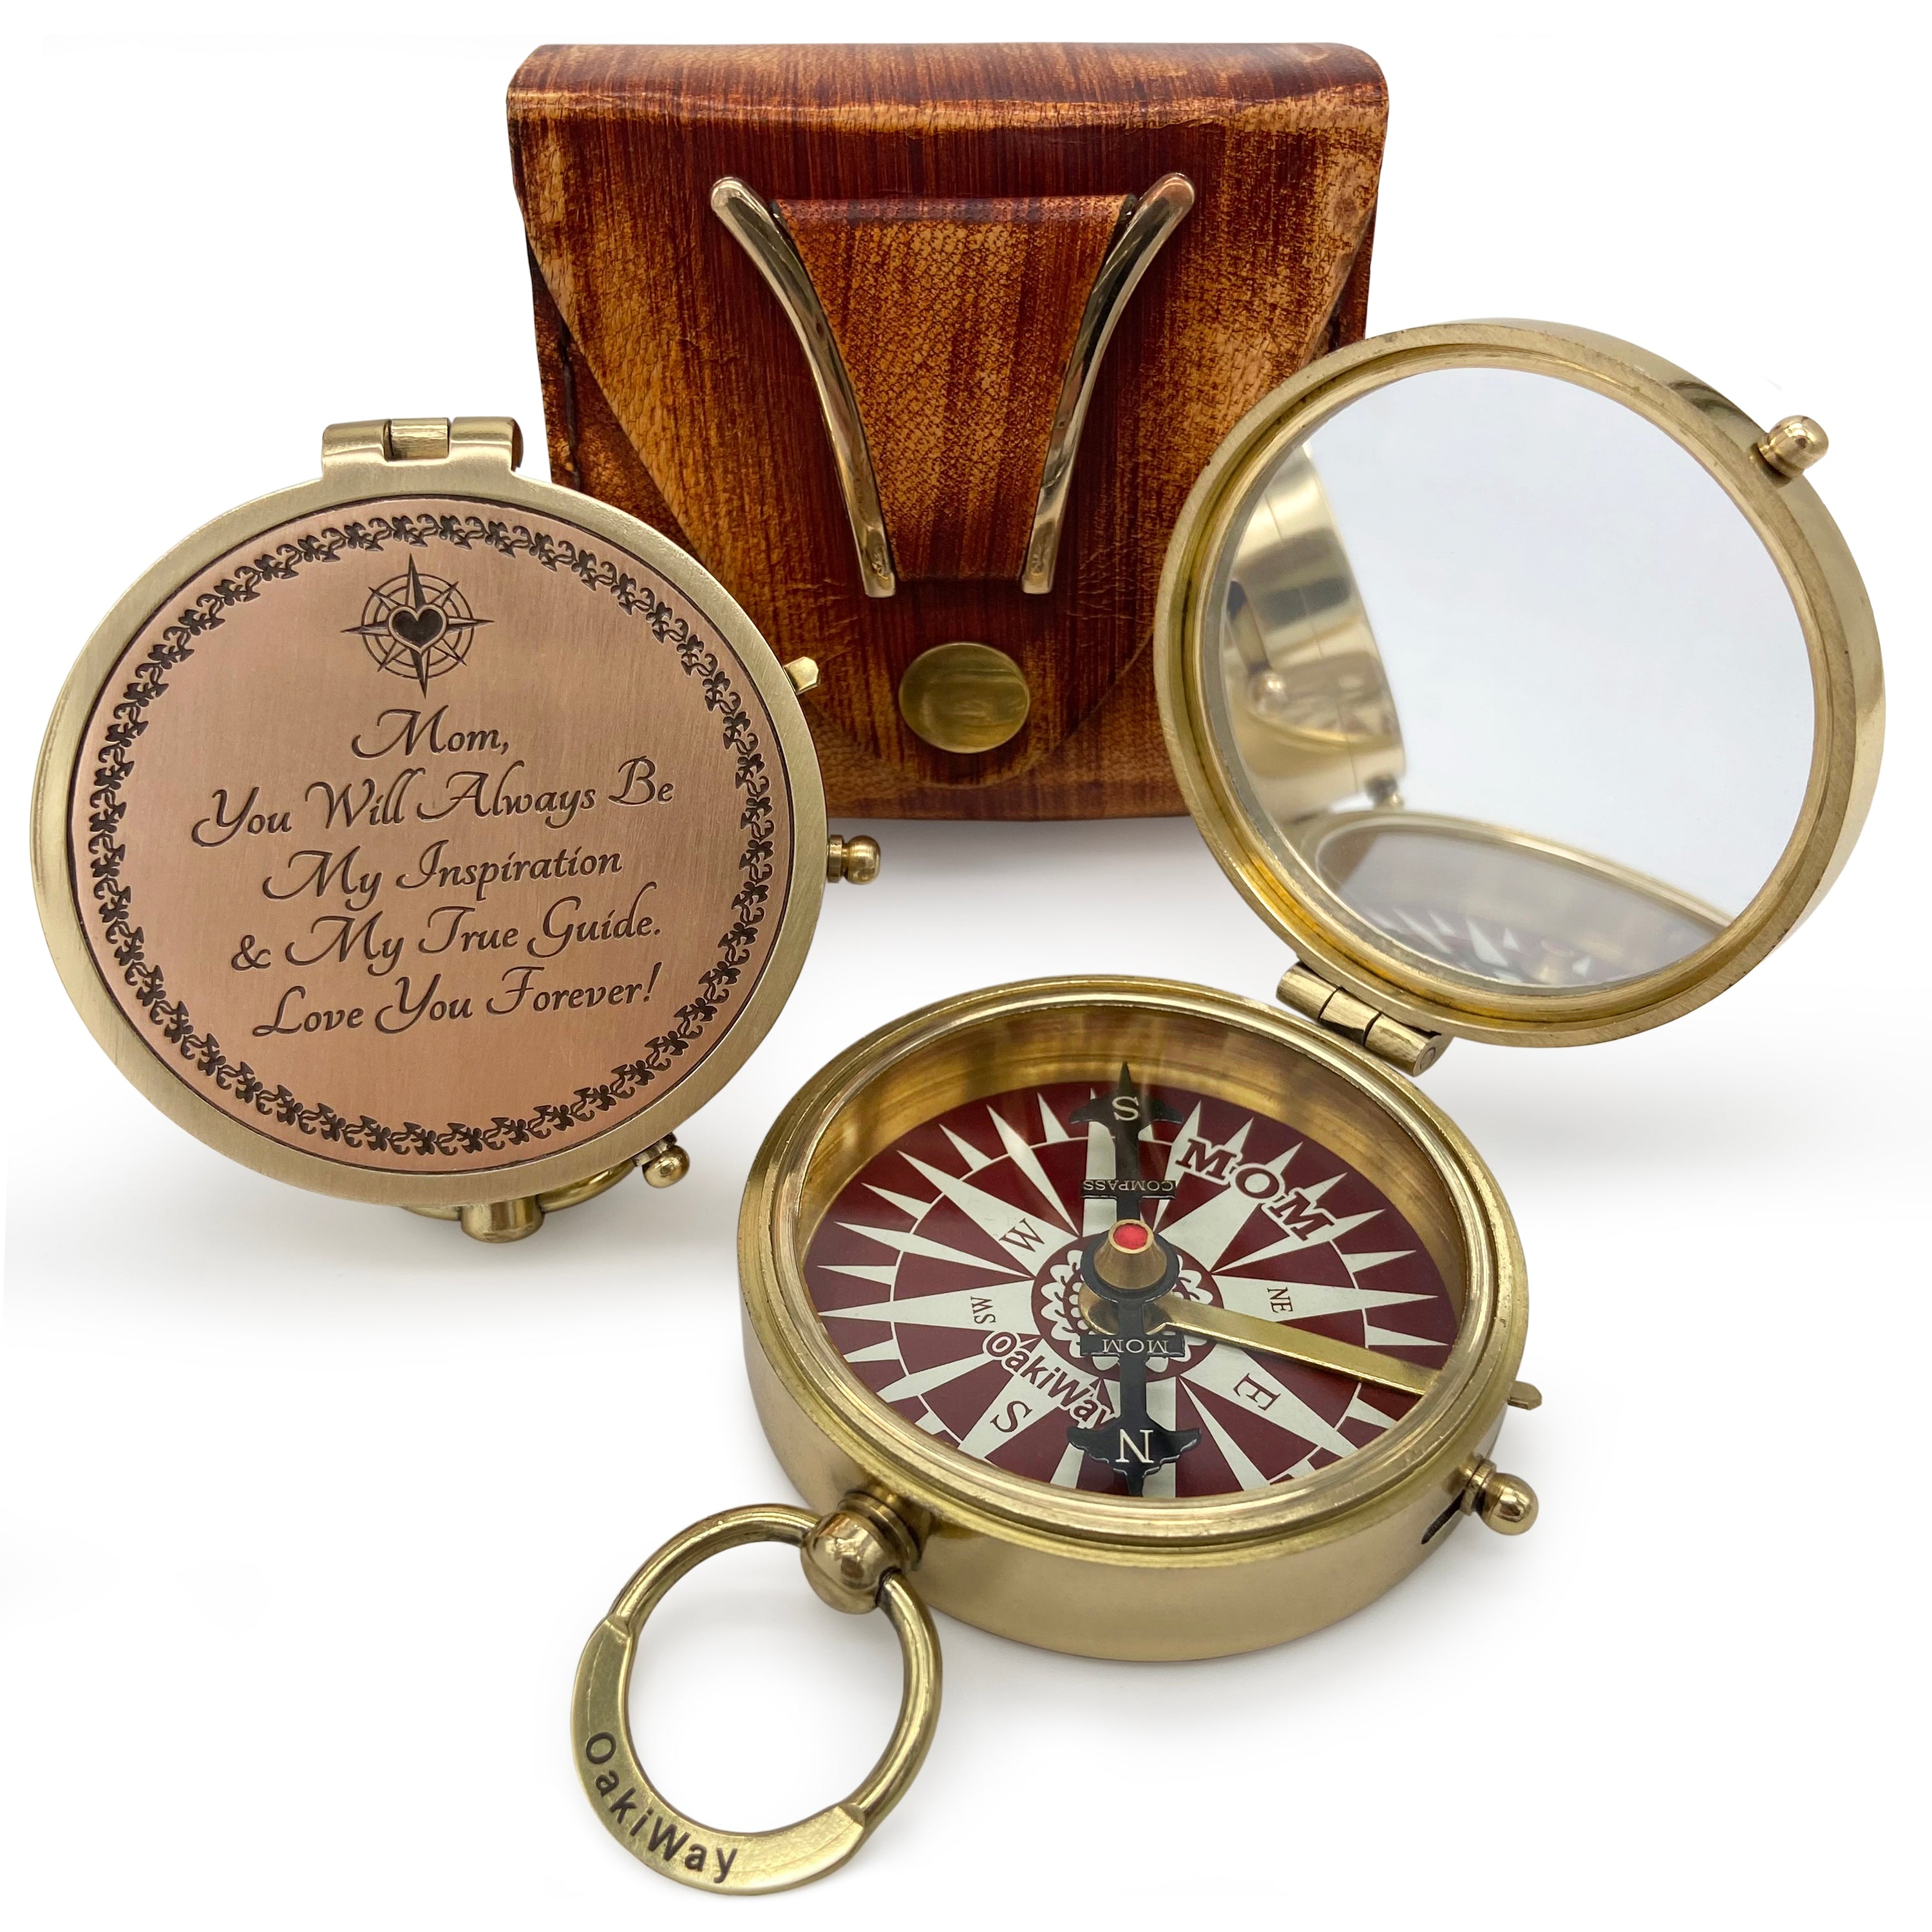 Gifts for Mom from Daughter or Son - Mom's Compass Gold Makeup Mirror - Birthday, Mothers Day, Sentimental & Meaningful Gift Idea